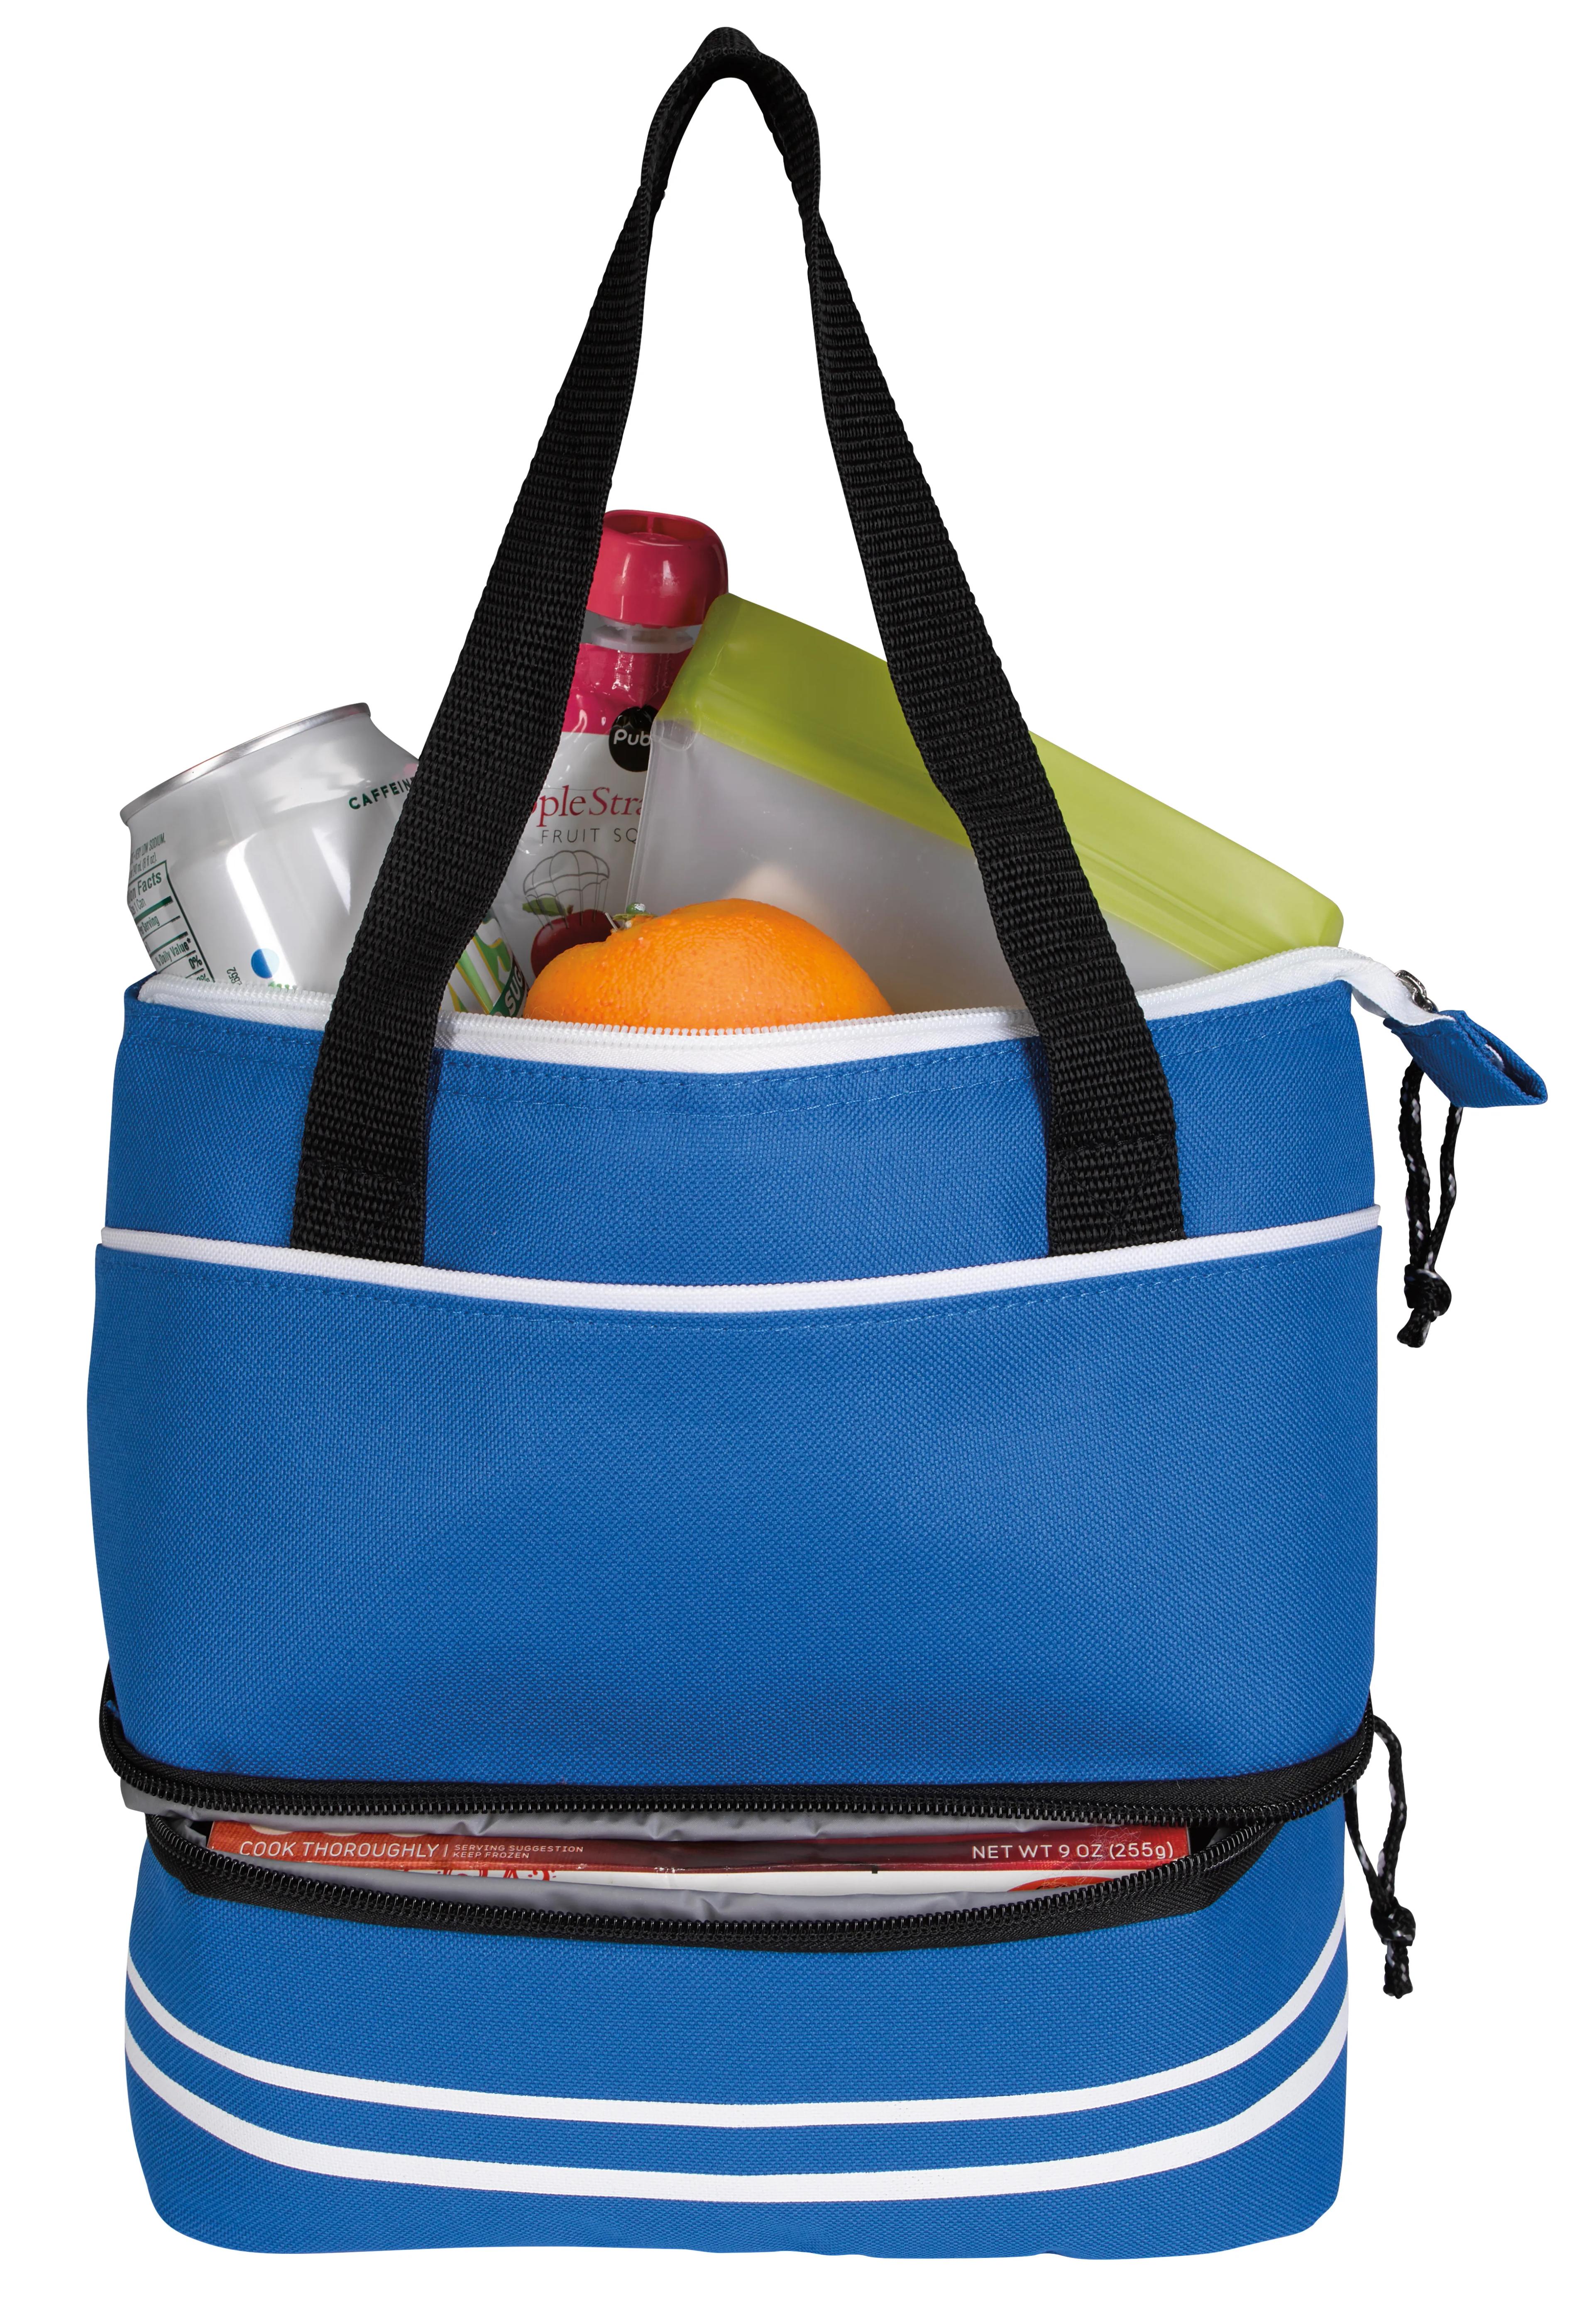 Bimini Dual-Compartment Lunch Cooler 23 of 30